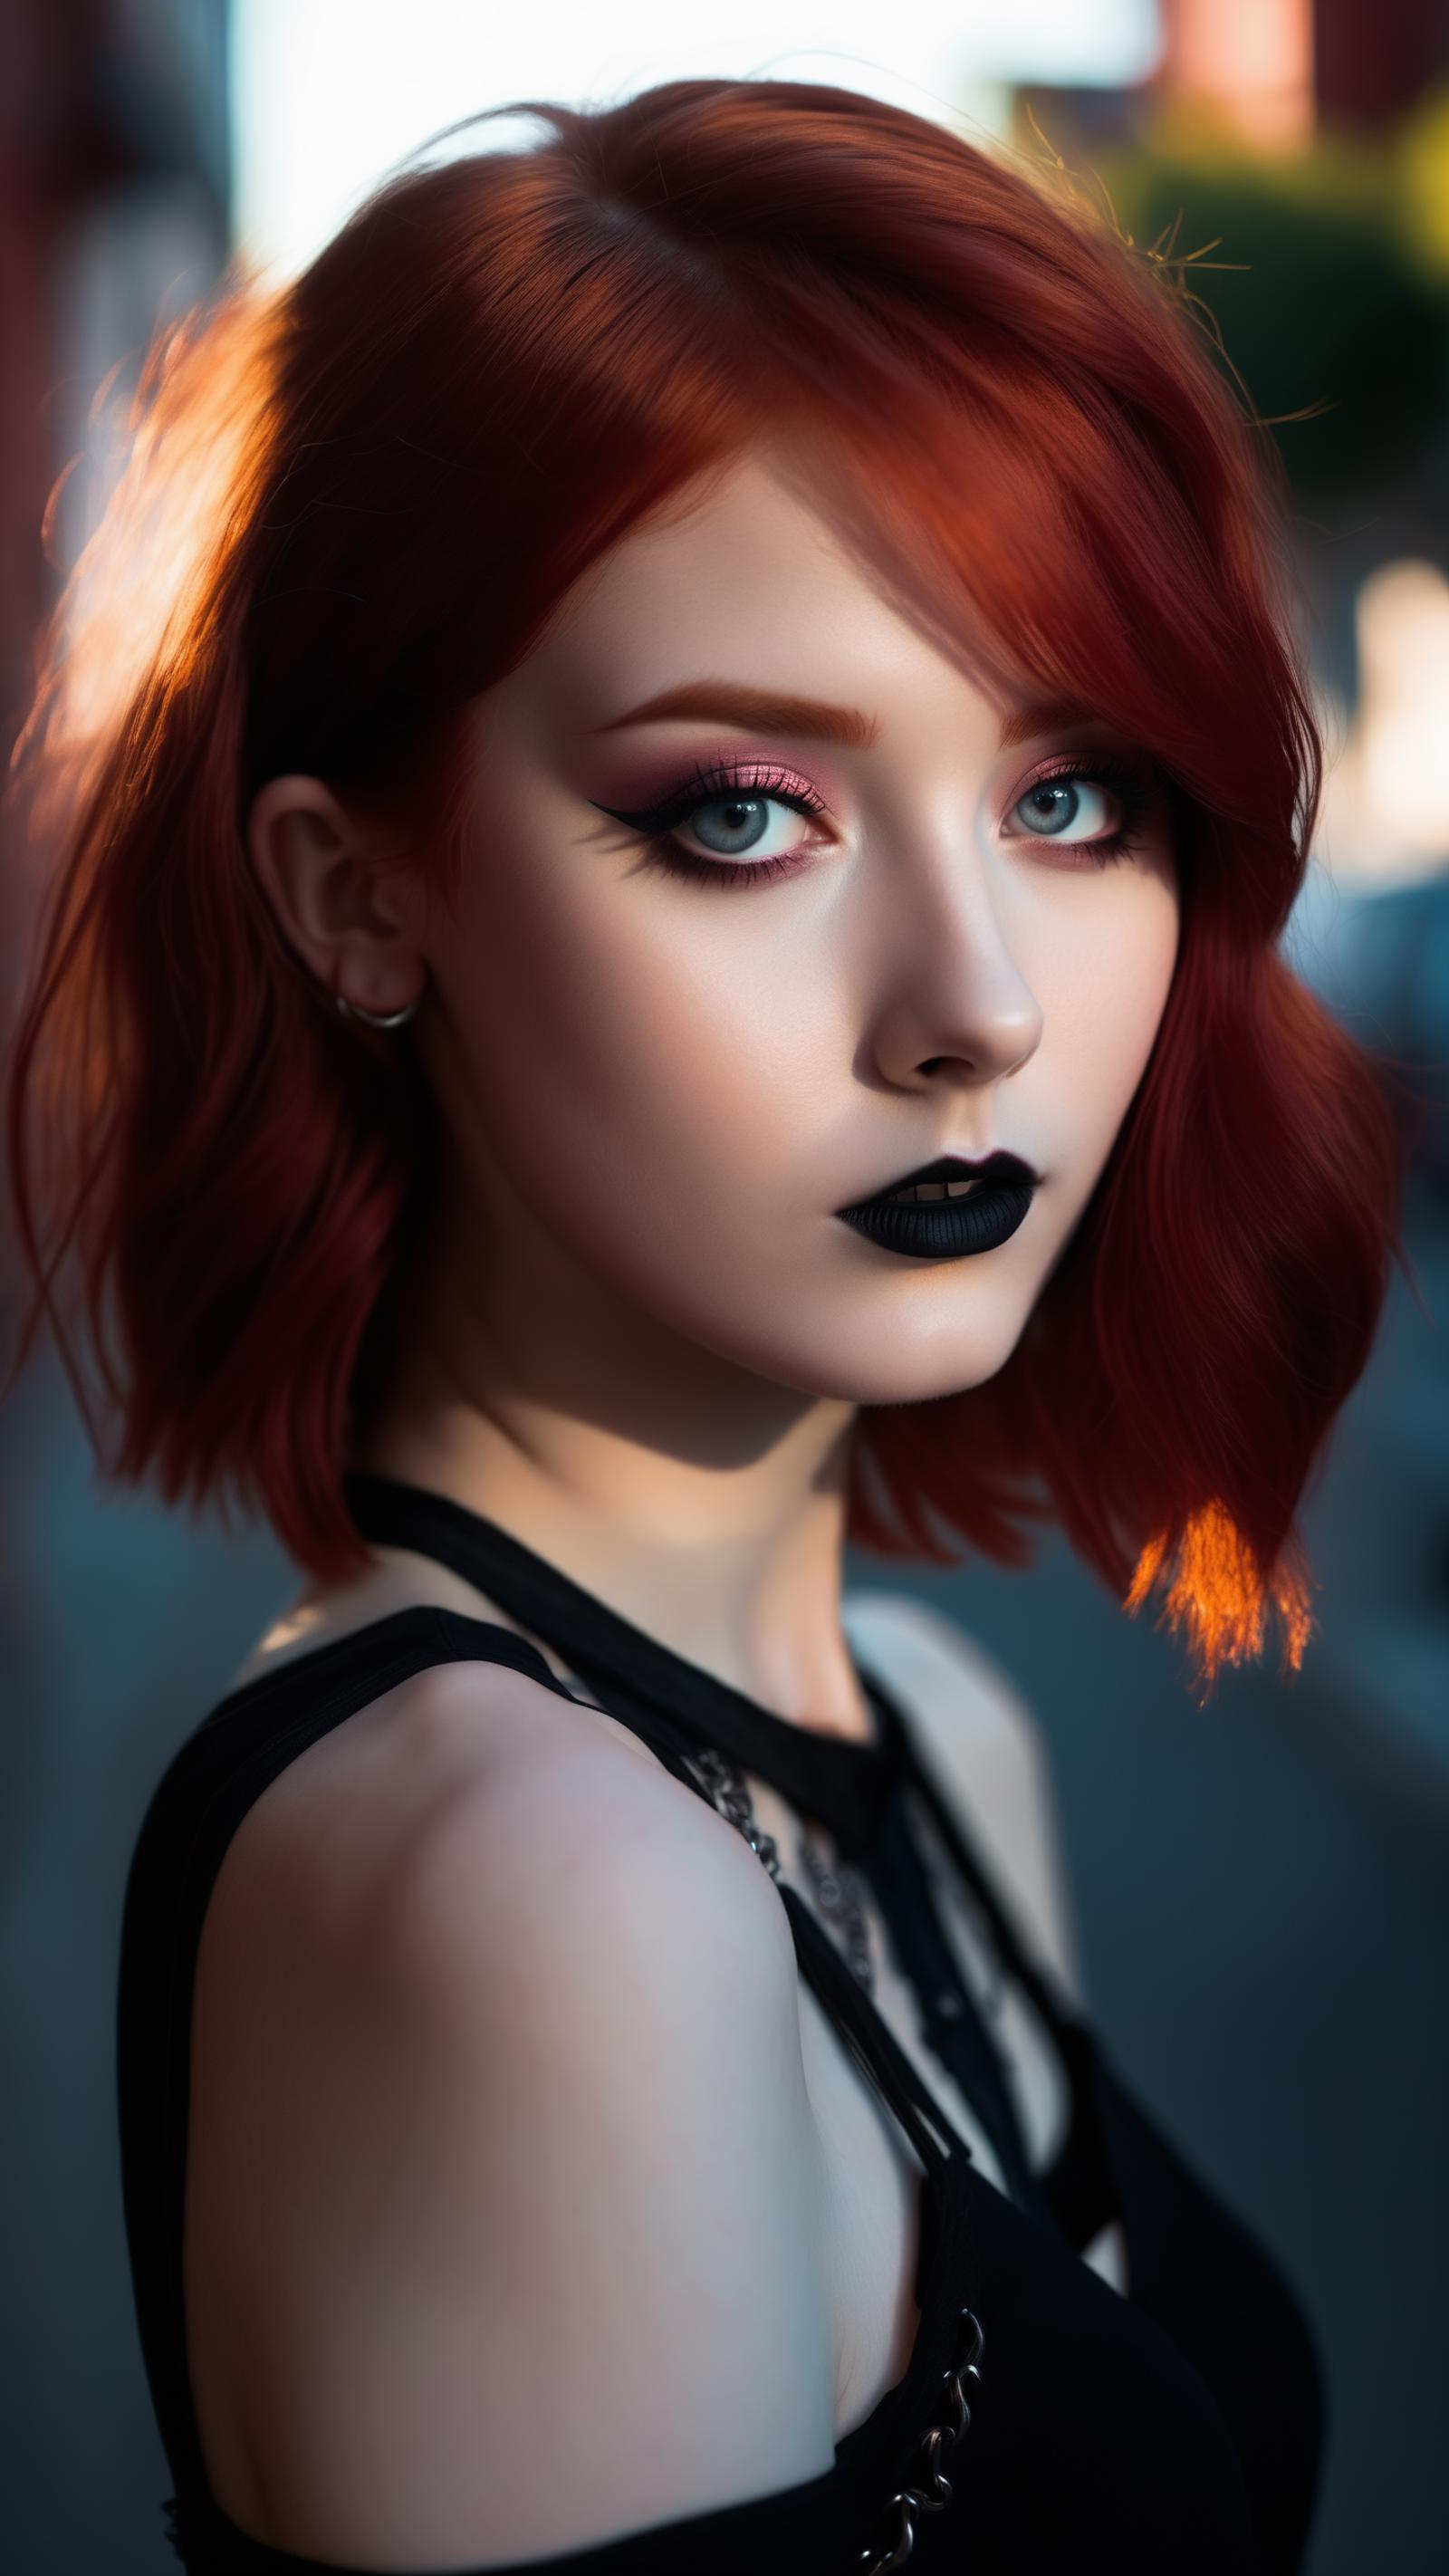 A red-haired woman with black lipstick and blue eyes.